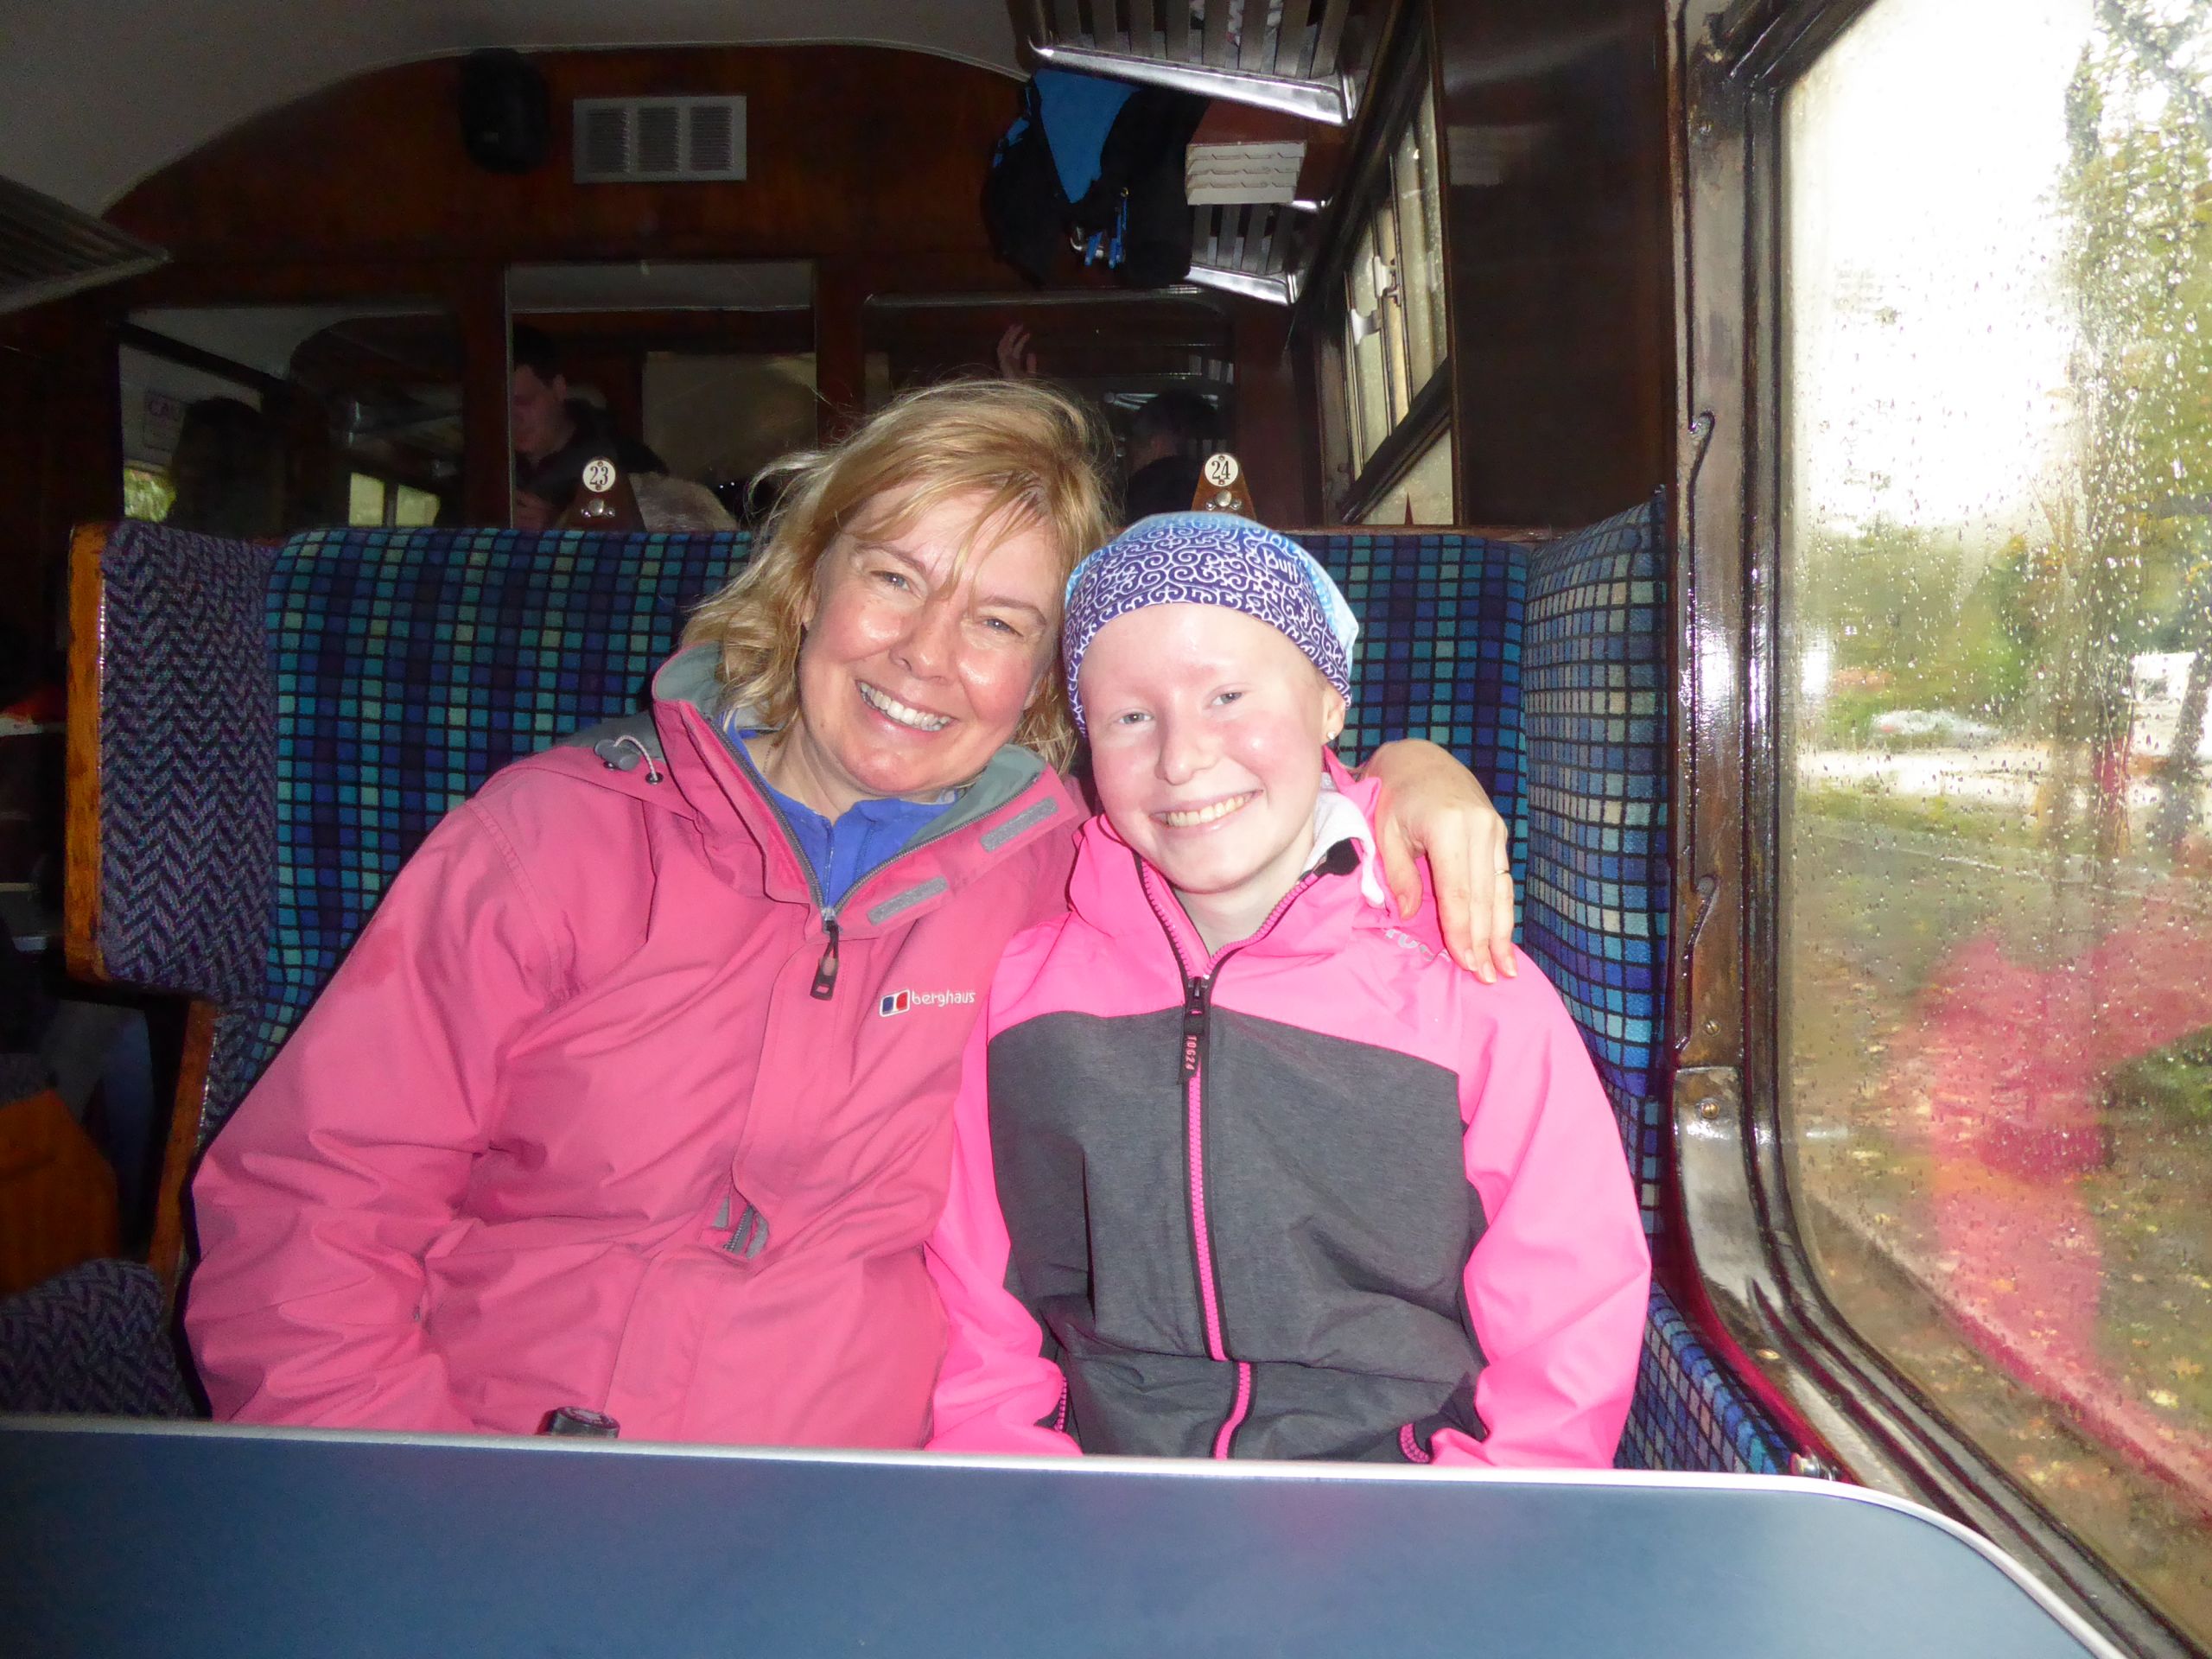 Mum Anita and her daughter Jess on a train going to Lake District. Wearing pink jackets. Jess has a headscarf on.